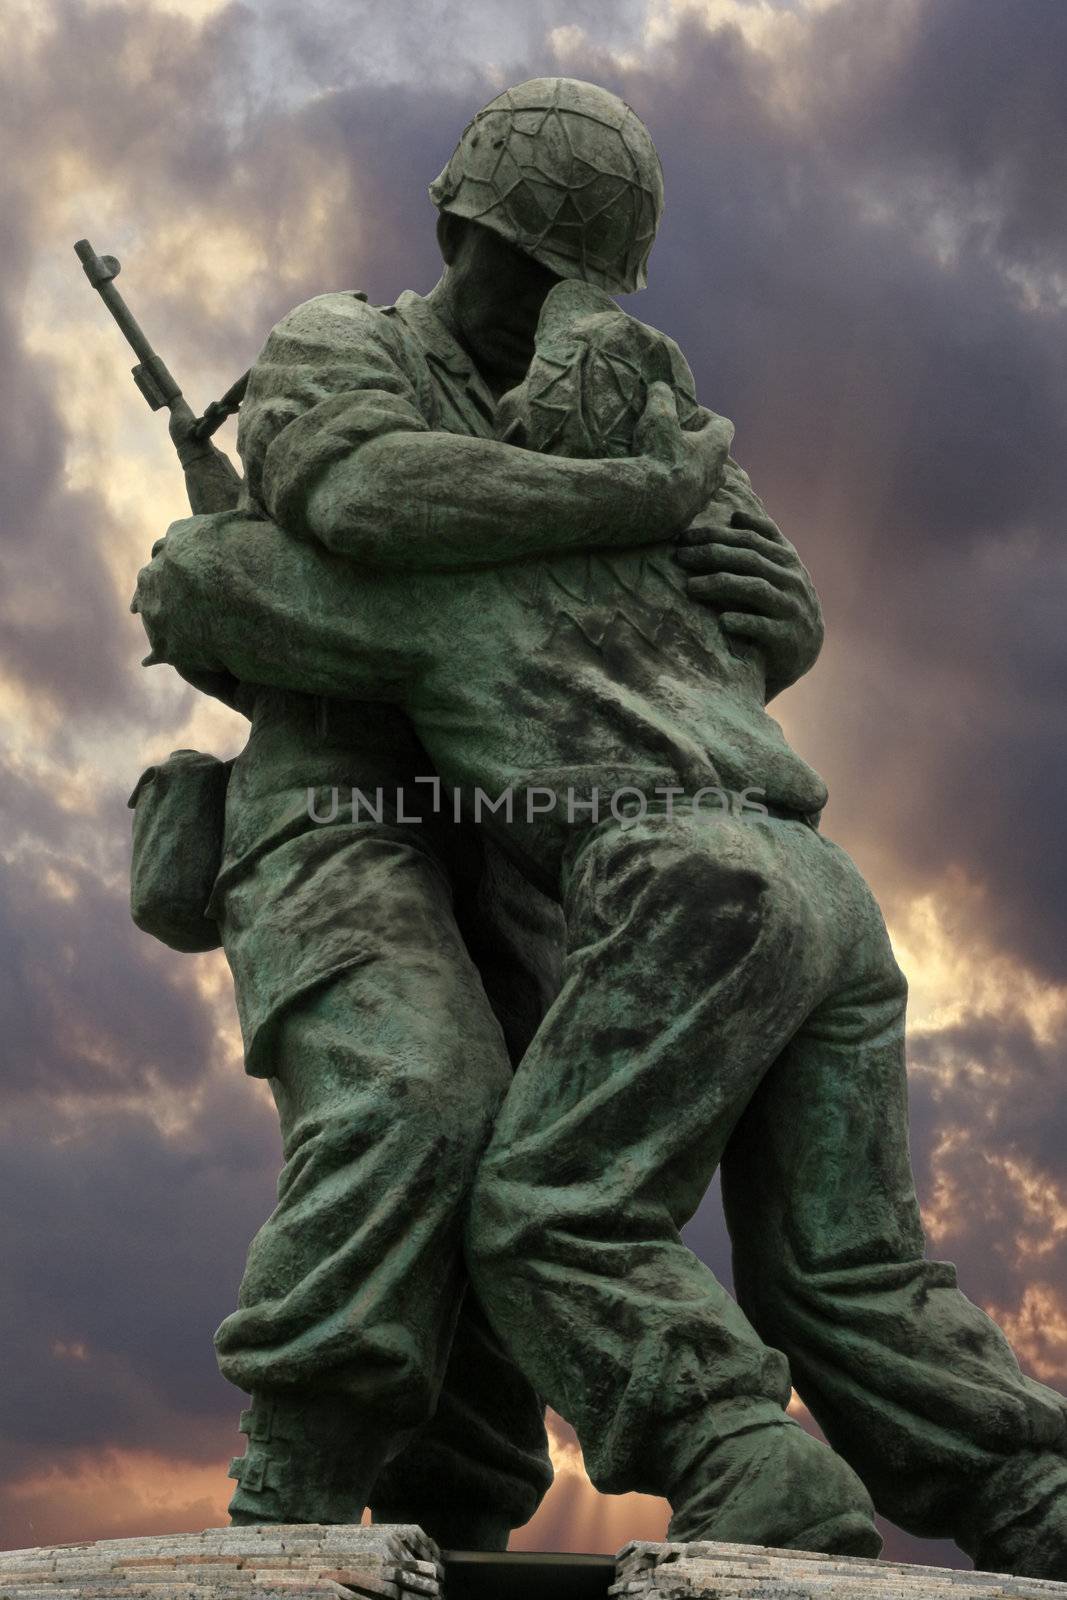 An unknown soldier statue in the Korean Memorial in Seoul Korea, with fierce dramatic sun blast at dusk- dramatic clouds with sunrays accentuating the horizon.